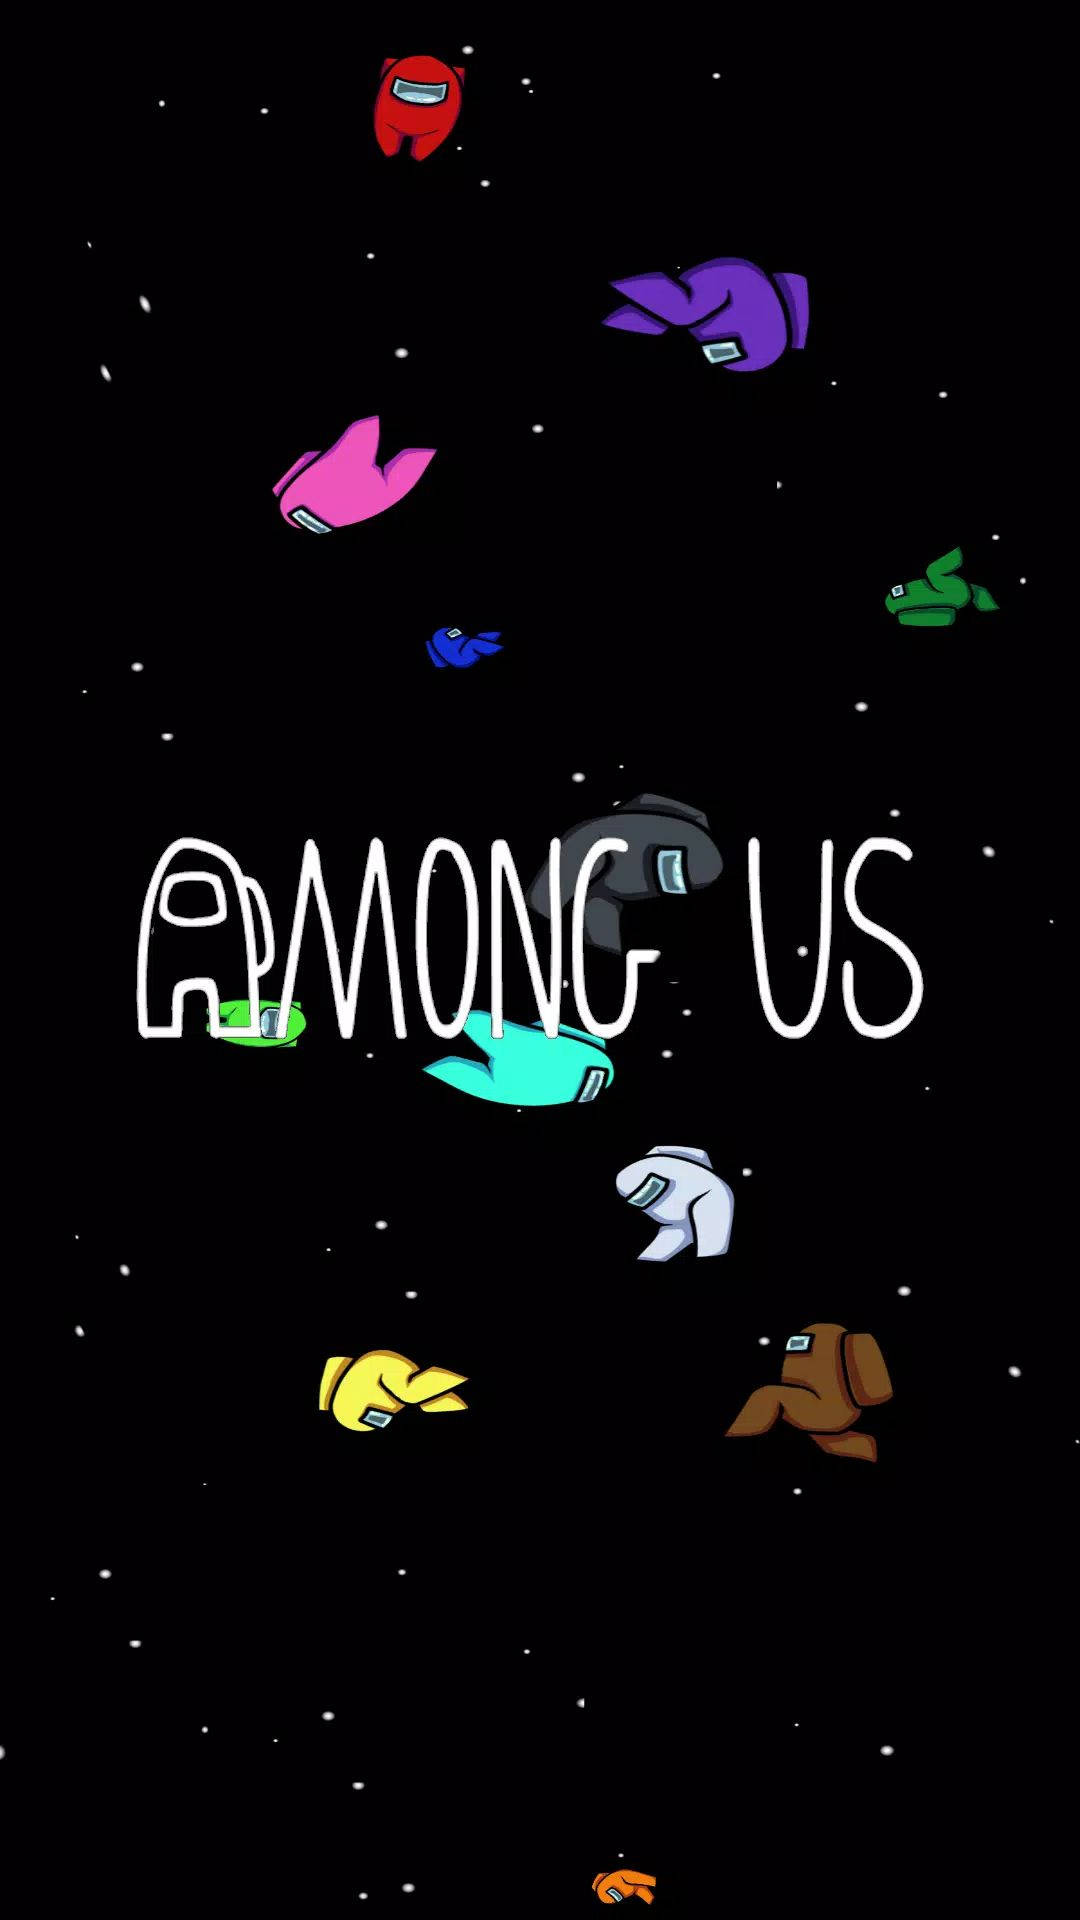 Among Us Game Title In Space Background